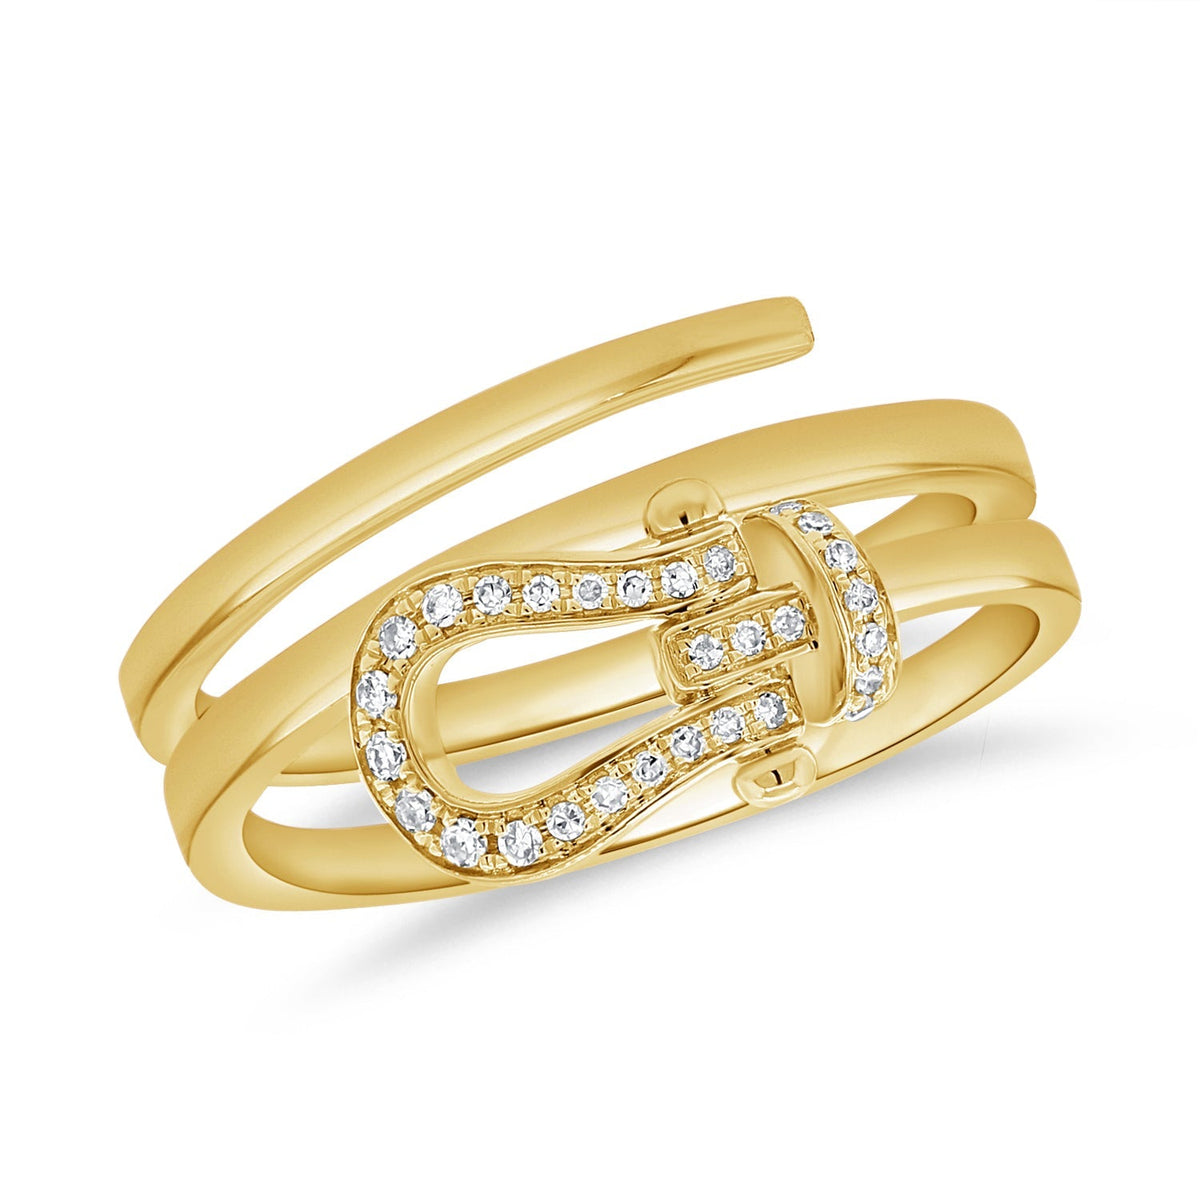 Hardware Spiral with 14K Yellow Gold Rings